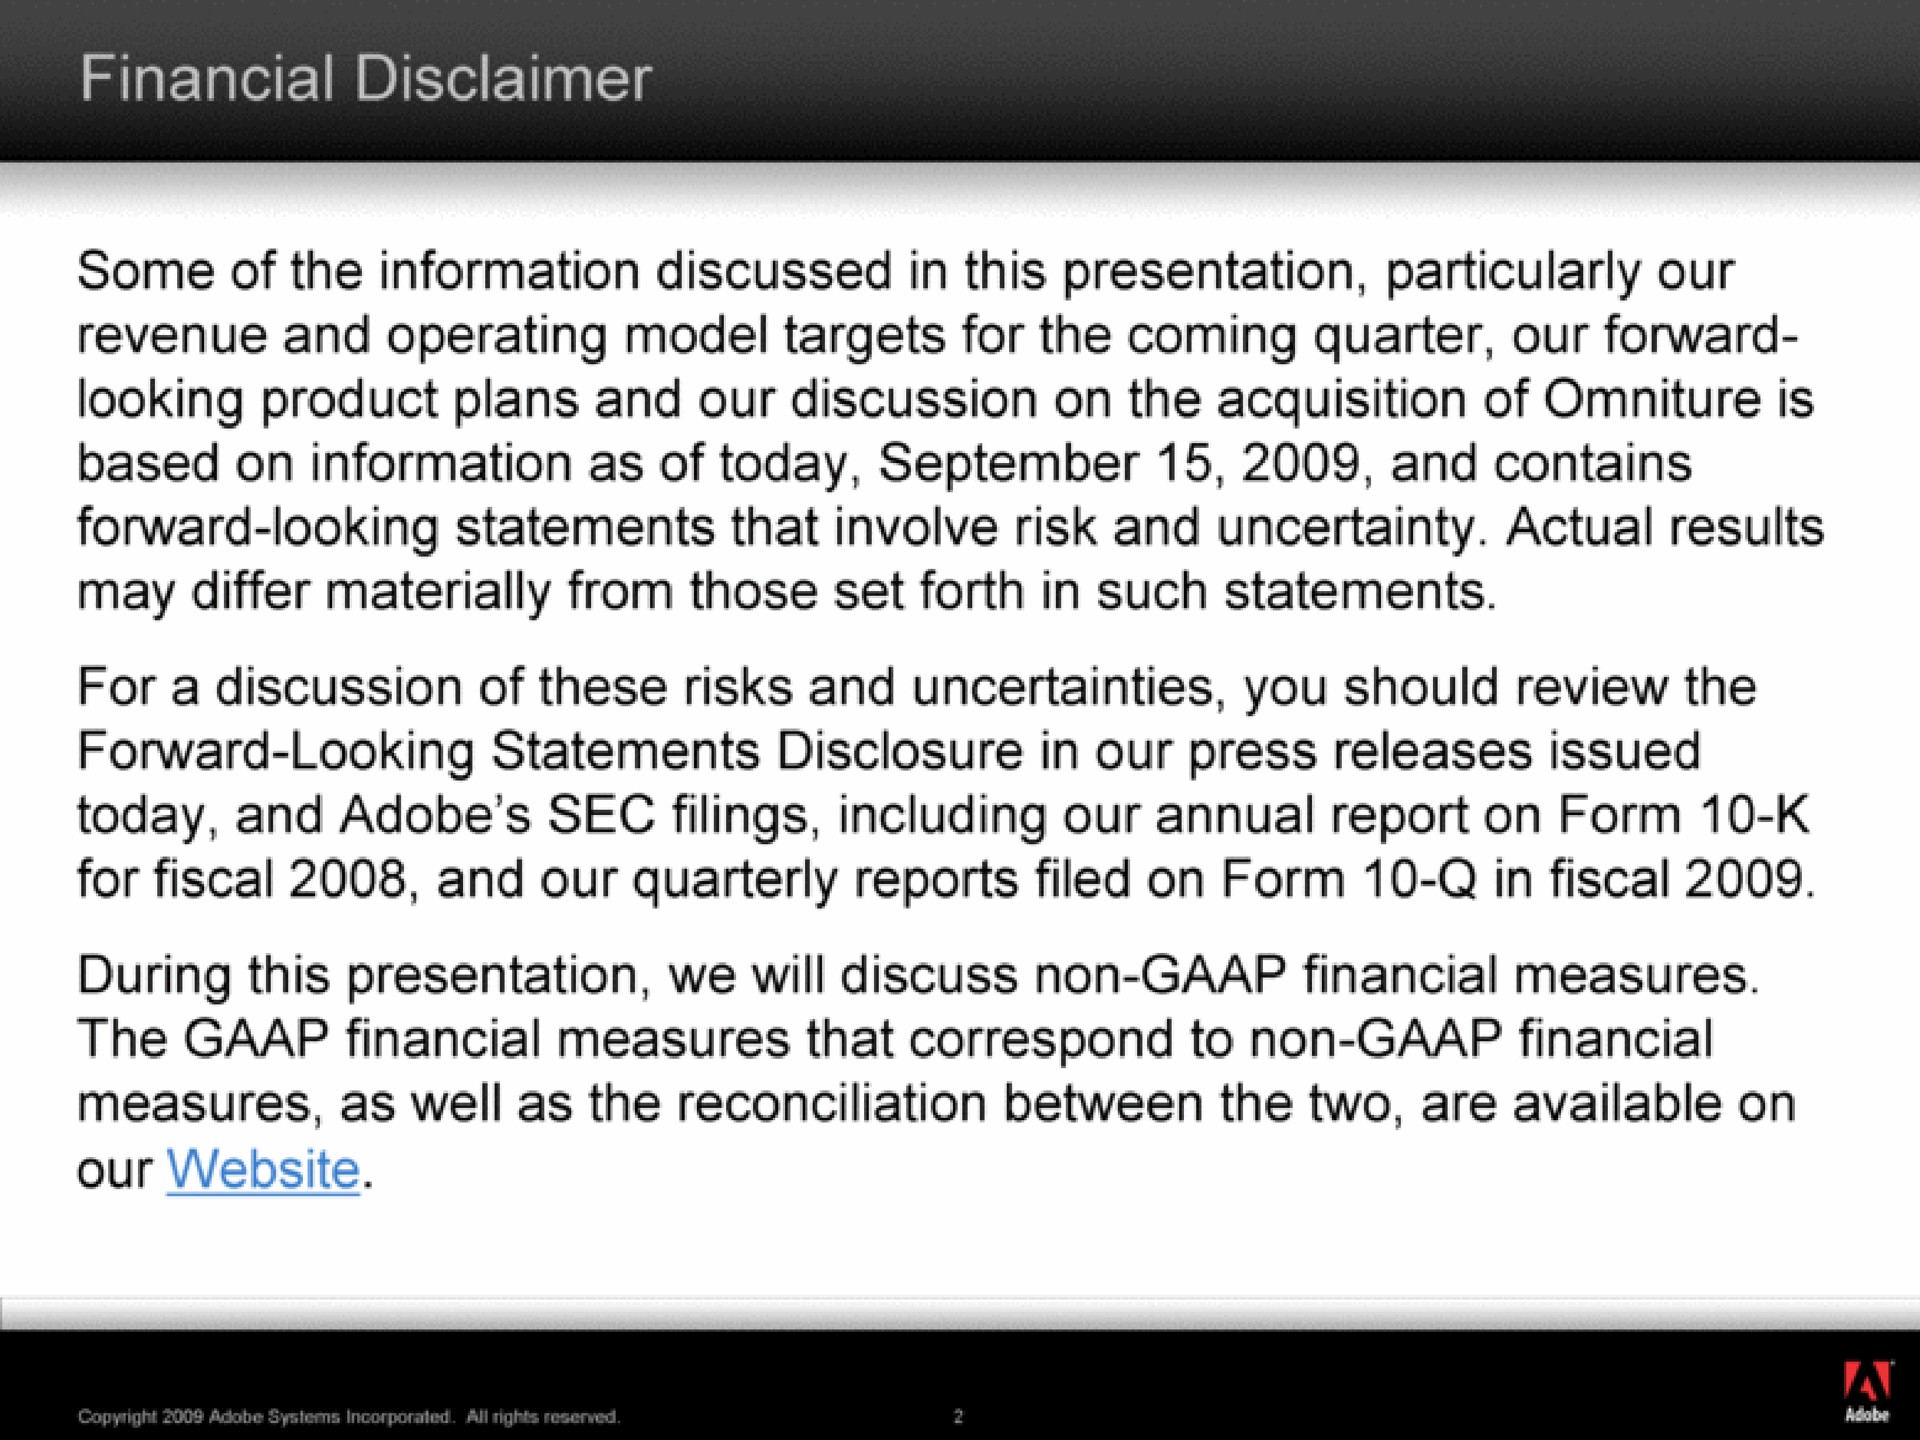 financial disclaimer some of the information discussed in this presentation particularly our revenue and operating model targets for the coming quarter our forward looking product plans and our discussion on the acquisition of is based on information as of today and contains forward looking statements that involve risk and uncertainty actual results may differ materially from those set forth in such statements today and adobe sec filings including our annual report on form for fiscal and our quarterly reports filed on form in fiscal during this presentation we will discuss non financial measures the financial measures that correspond to non financial measures as well as the reconciliation between the two are available on our | Adobe